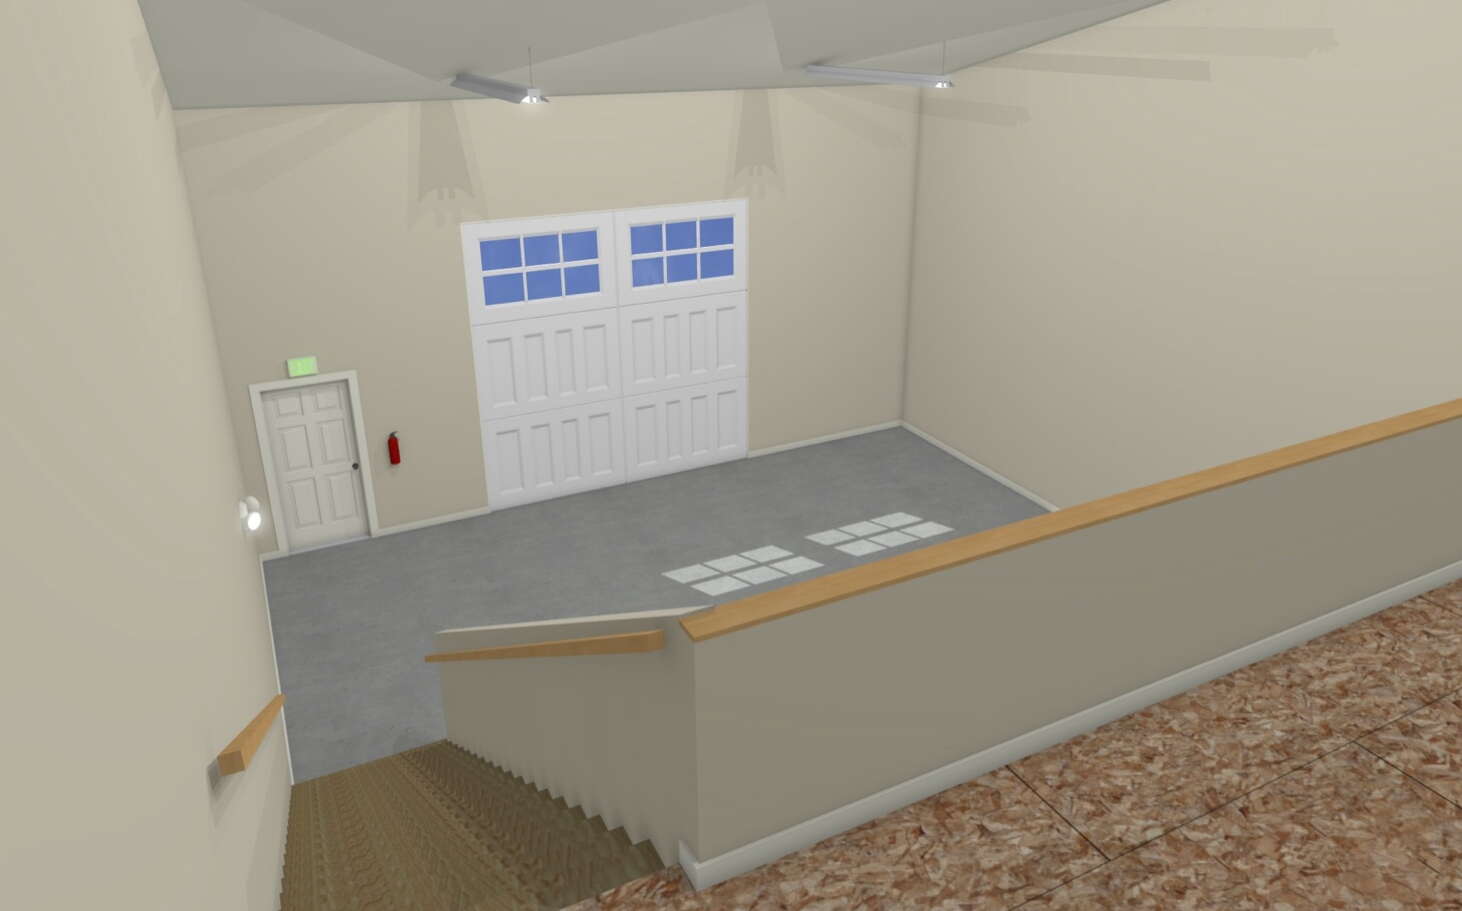 This rendering shows a view from the second story down to the entry door.